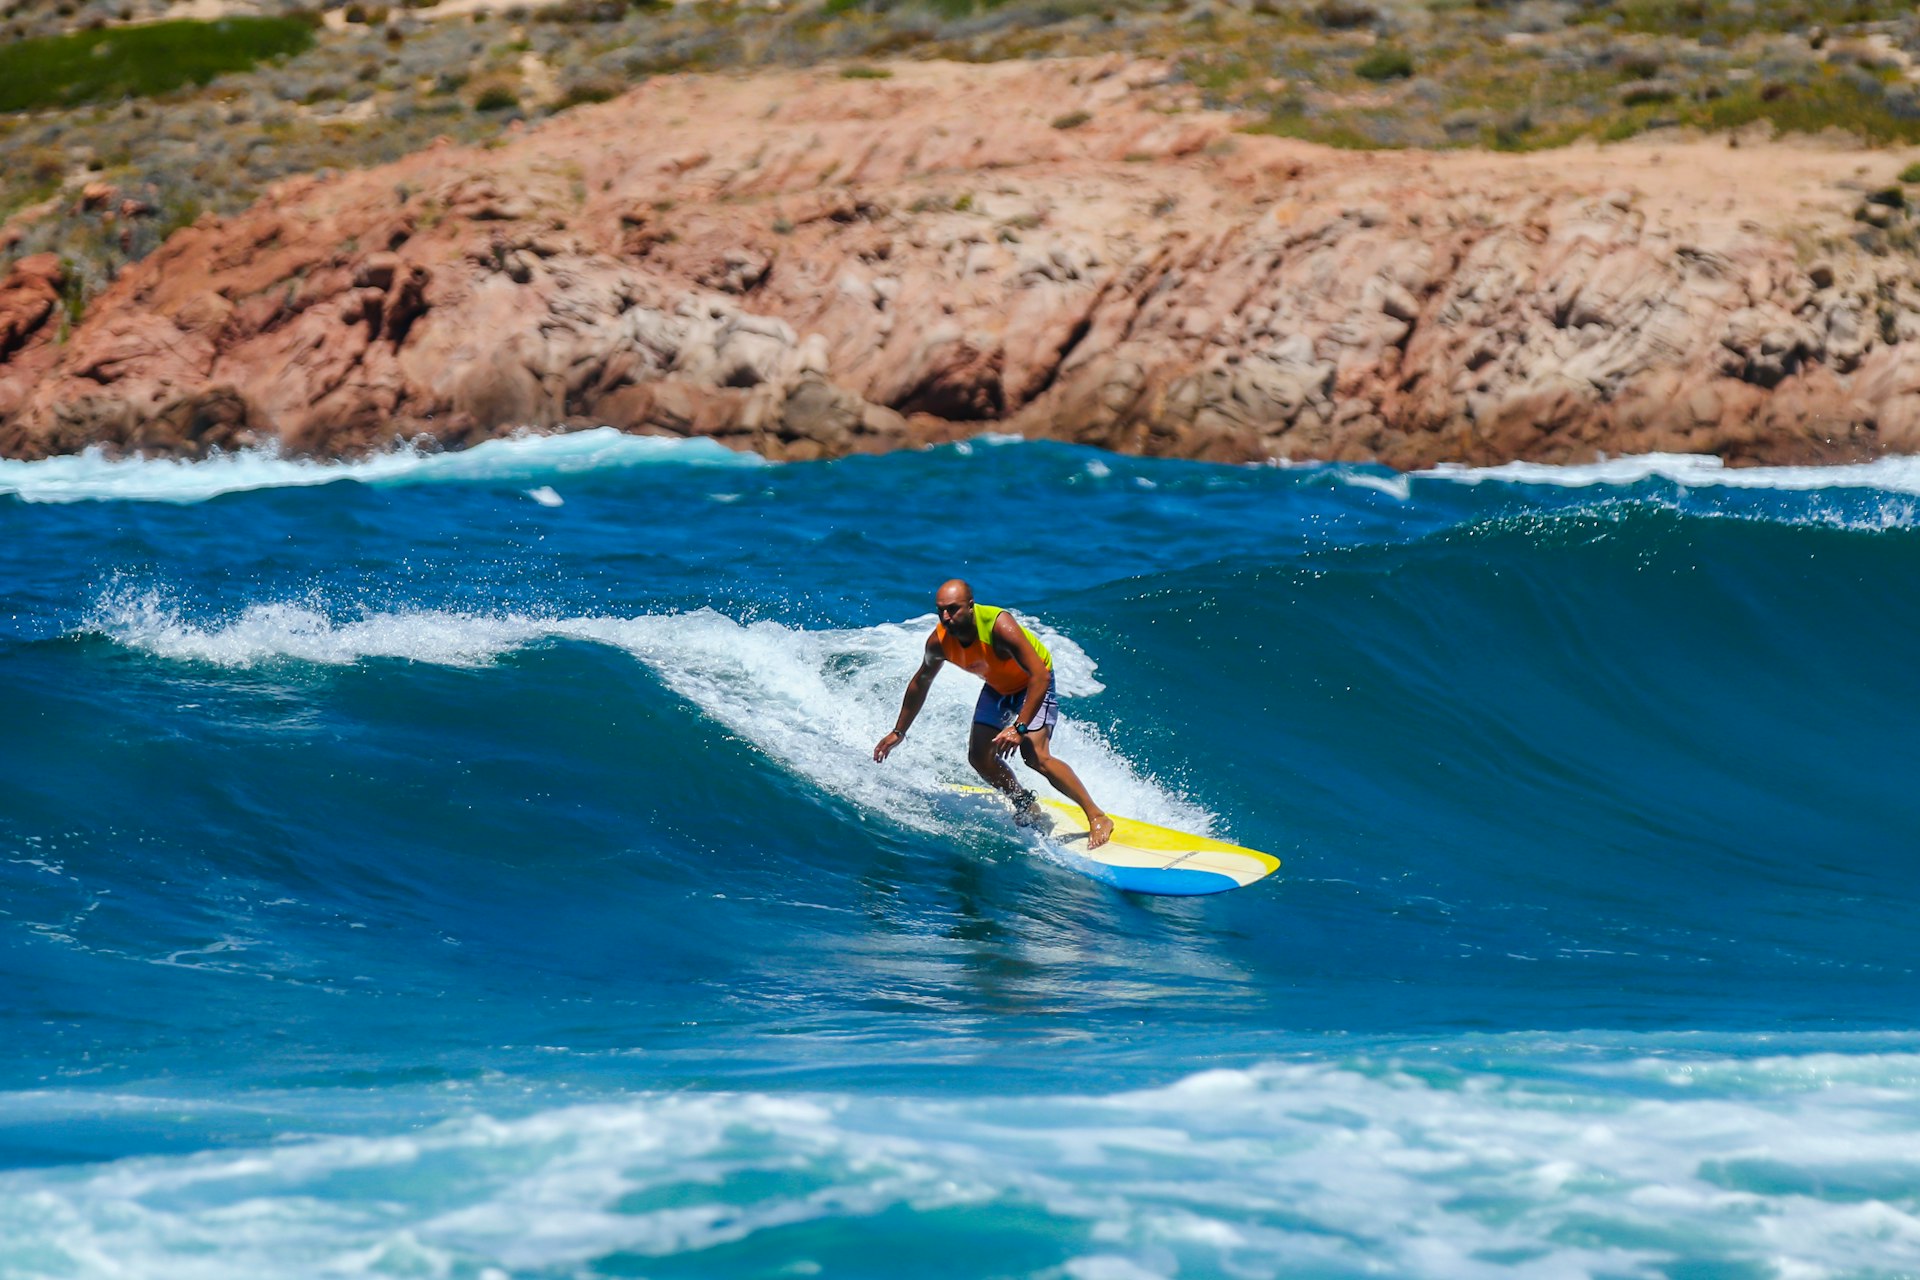 A surfer catches a wave during the Mistral, Isola Rossa, Sardinia, Italy